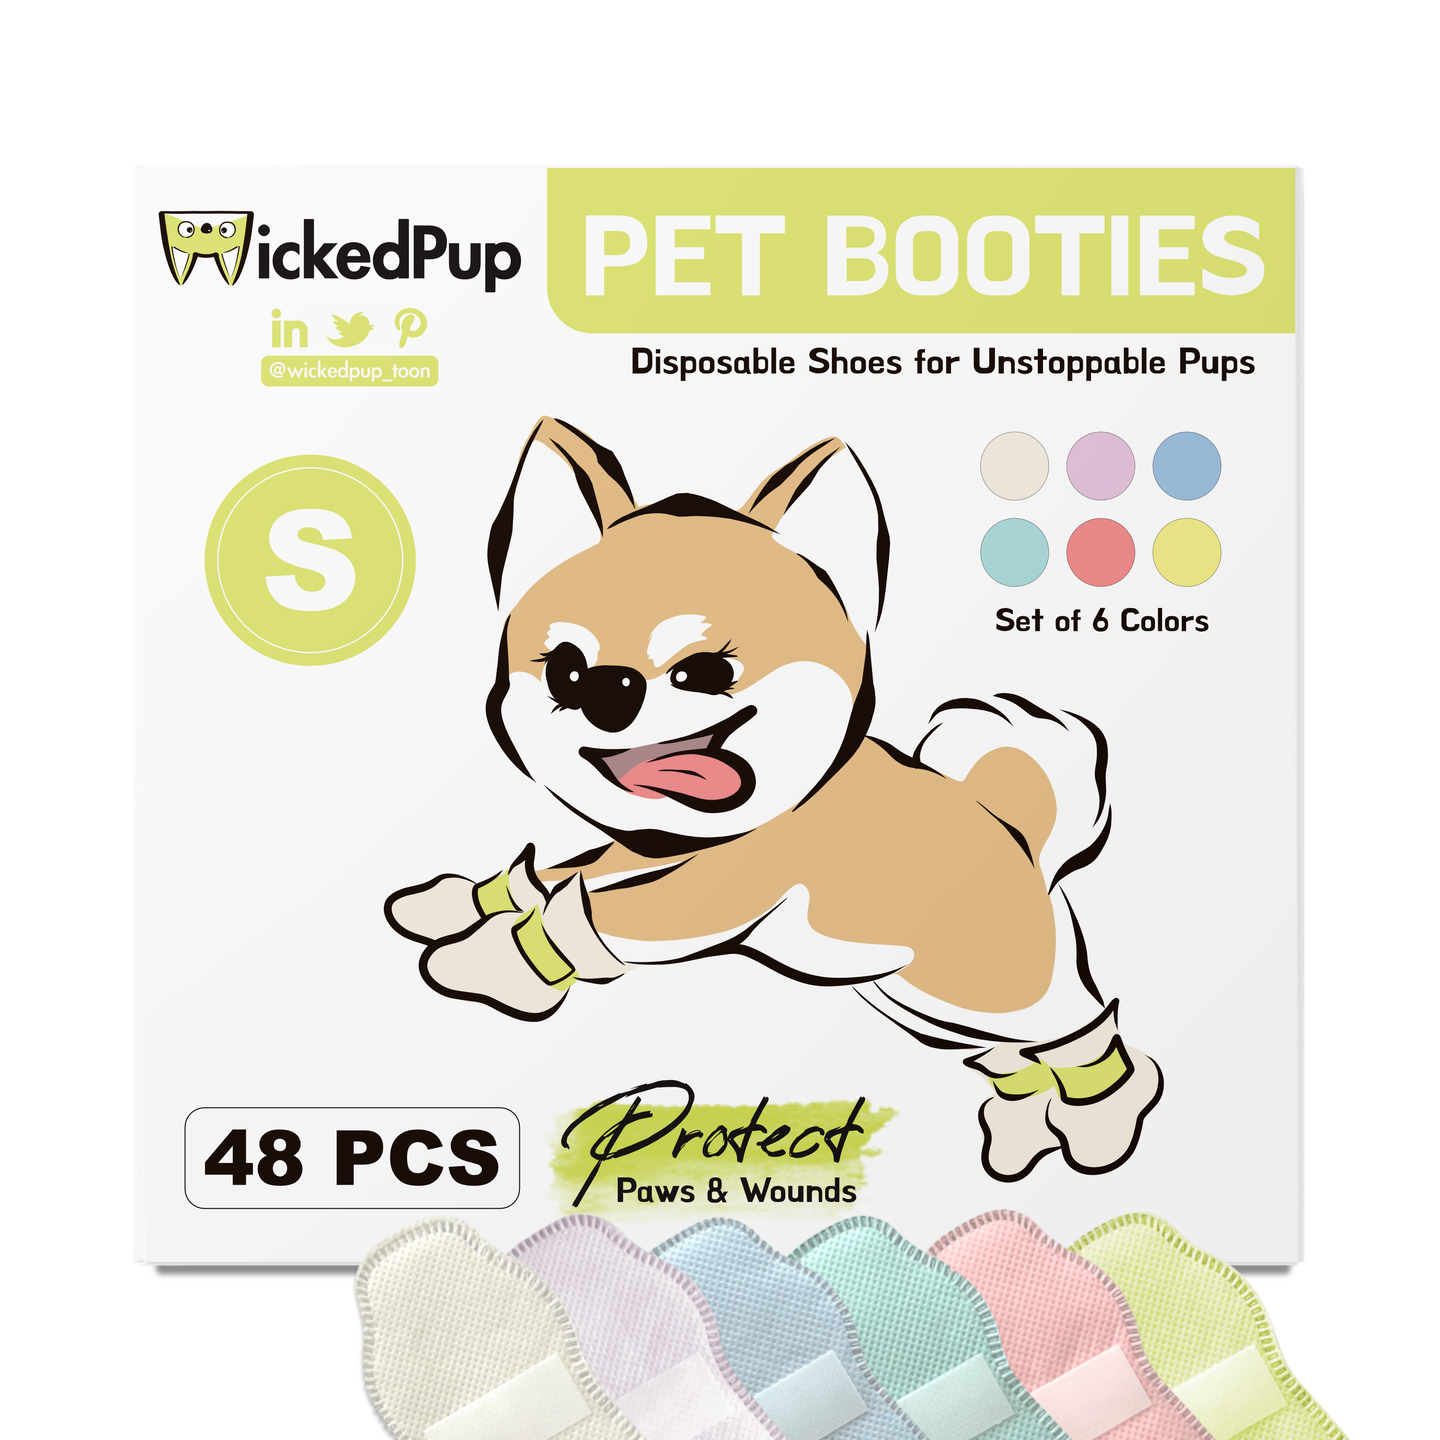 WickedPup Paw Protection Booties for Pets, Set of 6 Colors, 48 Count